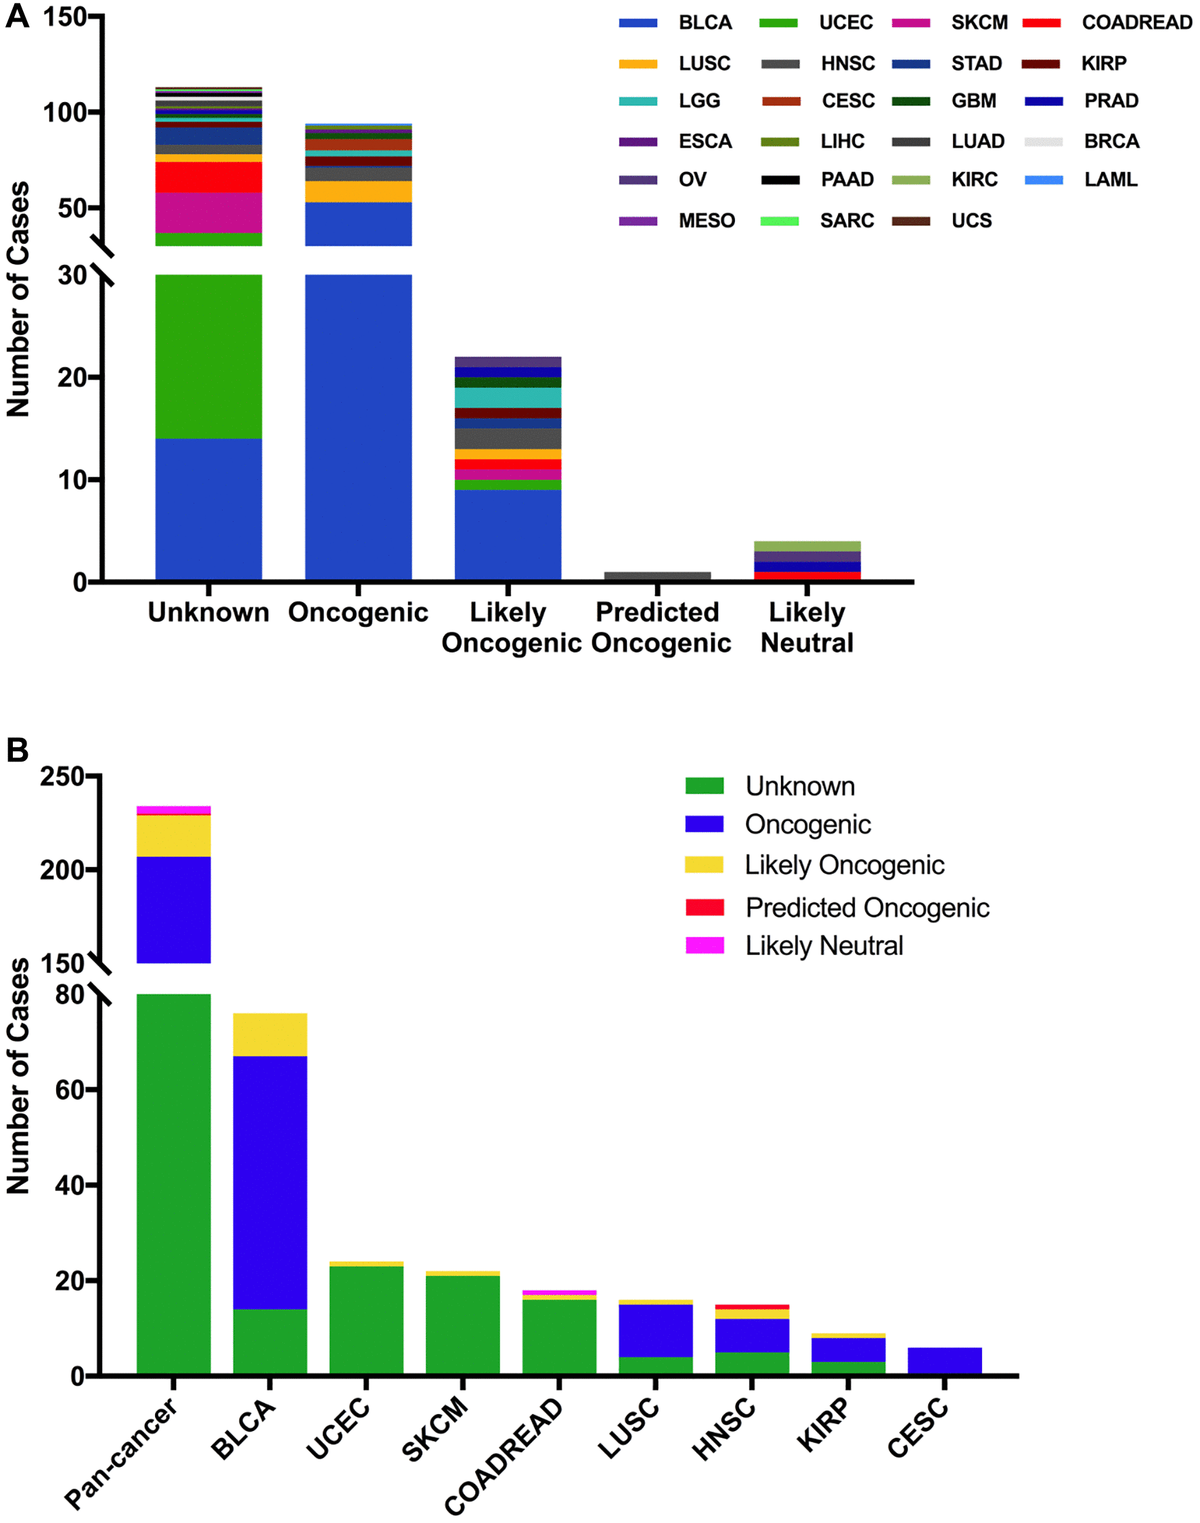 FGFR3 mutation classification based on the functional impact on protein coding. (A) FGFR3 mutations were categorized according to the functional impacts on all tumors together. (B) Functional impact category distribution of FGFR3 mutations in pan-cancer and the top eight tumor types.